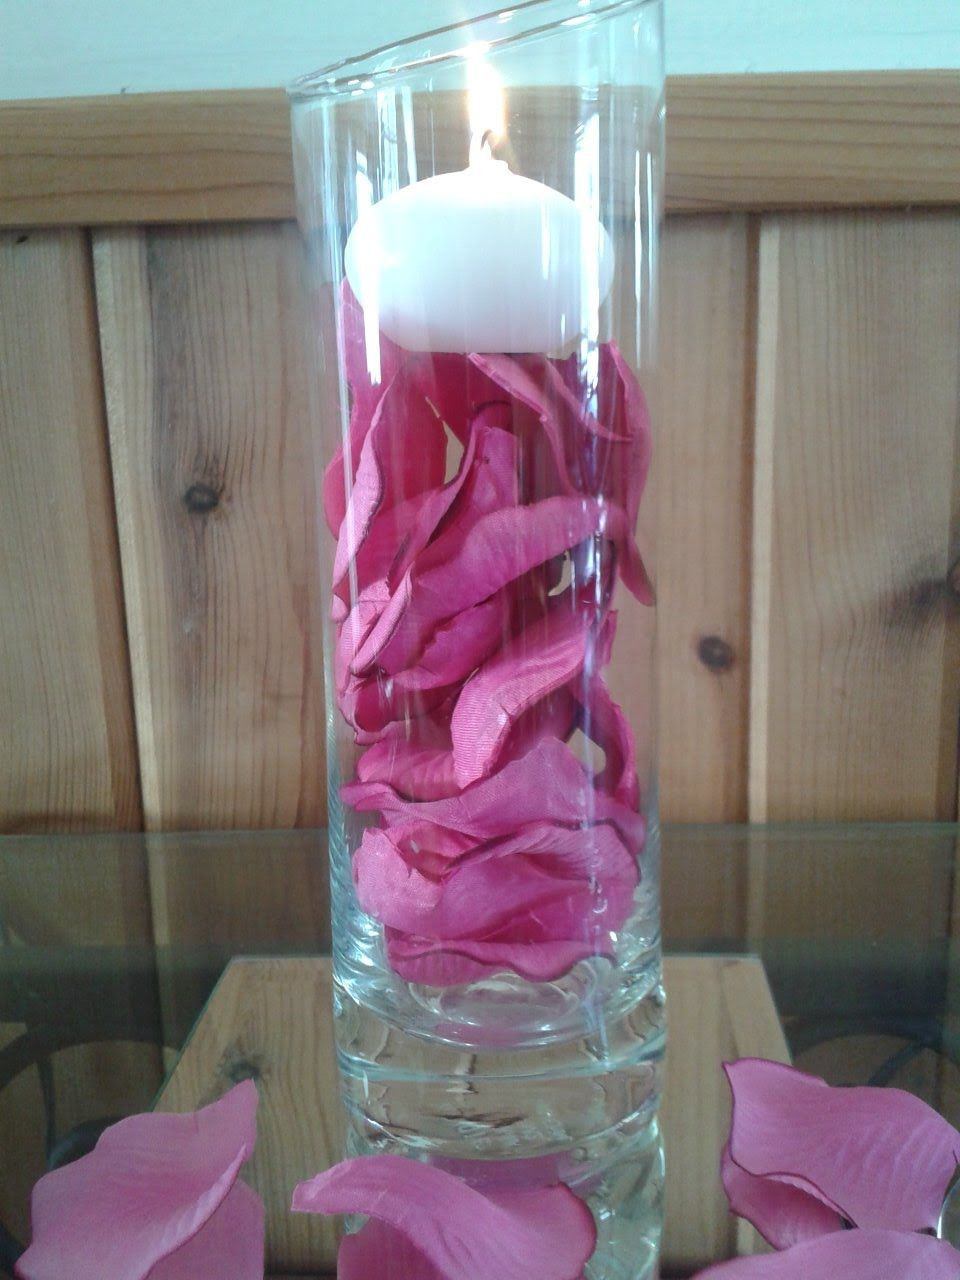 12 Unique Wedding Centerpieces Vases Floating Candles 2024 free download wedding centerpieces vases floating candles of wedding or valentines day diy rose petals floating candle vase with regard to wedding or valentines day diy rose petals floating candle vase yo